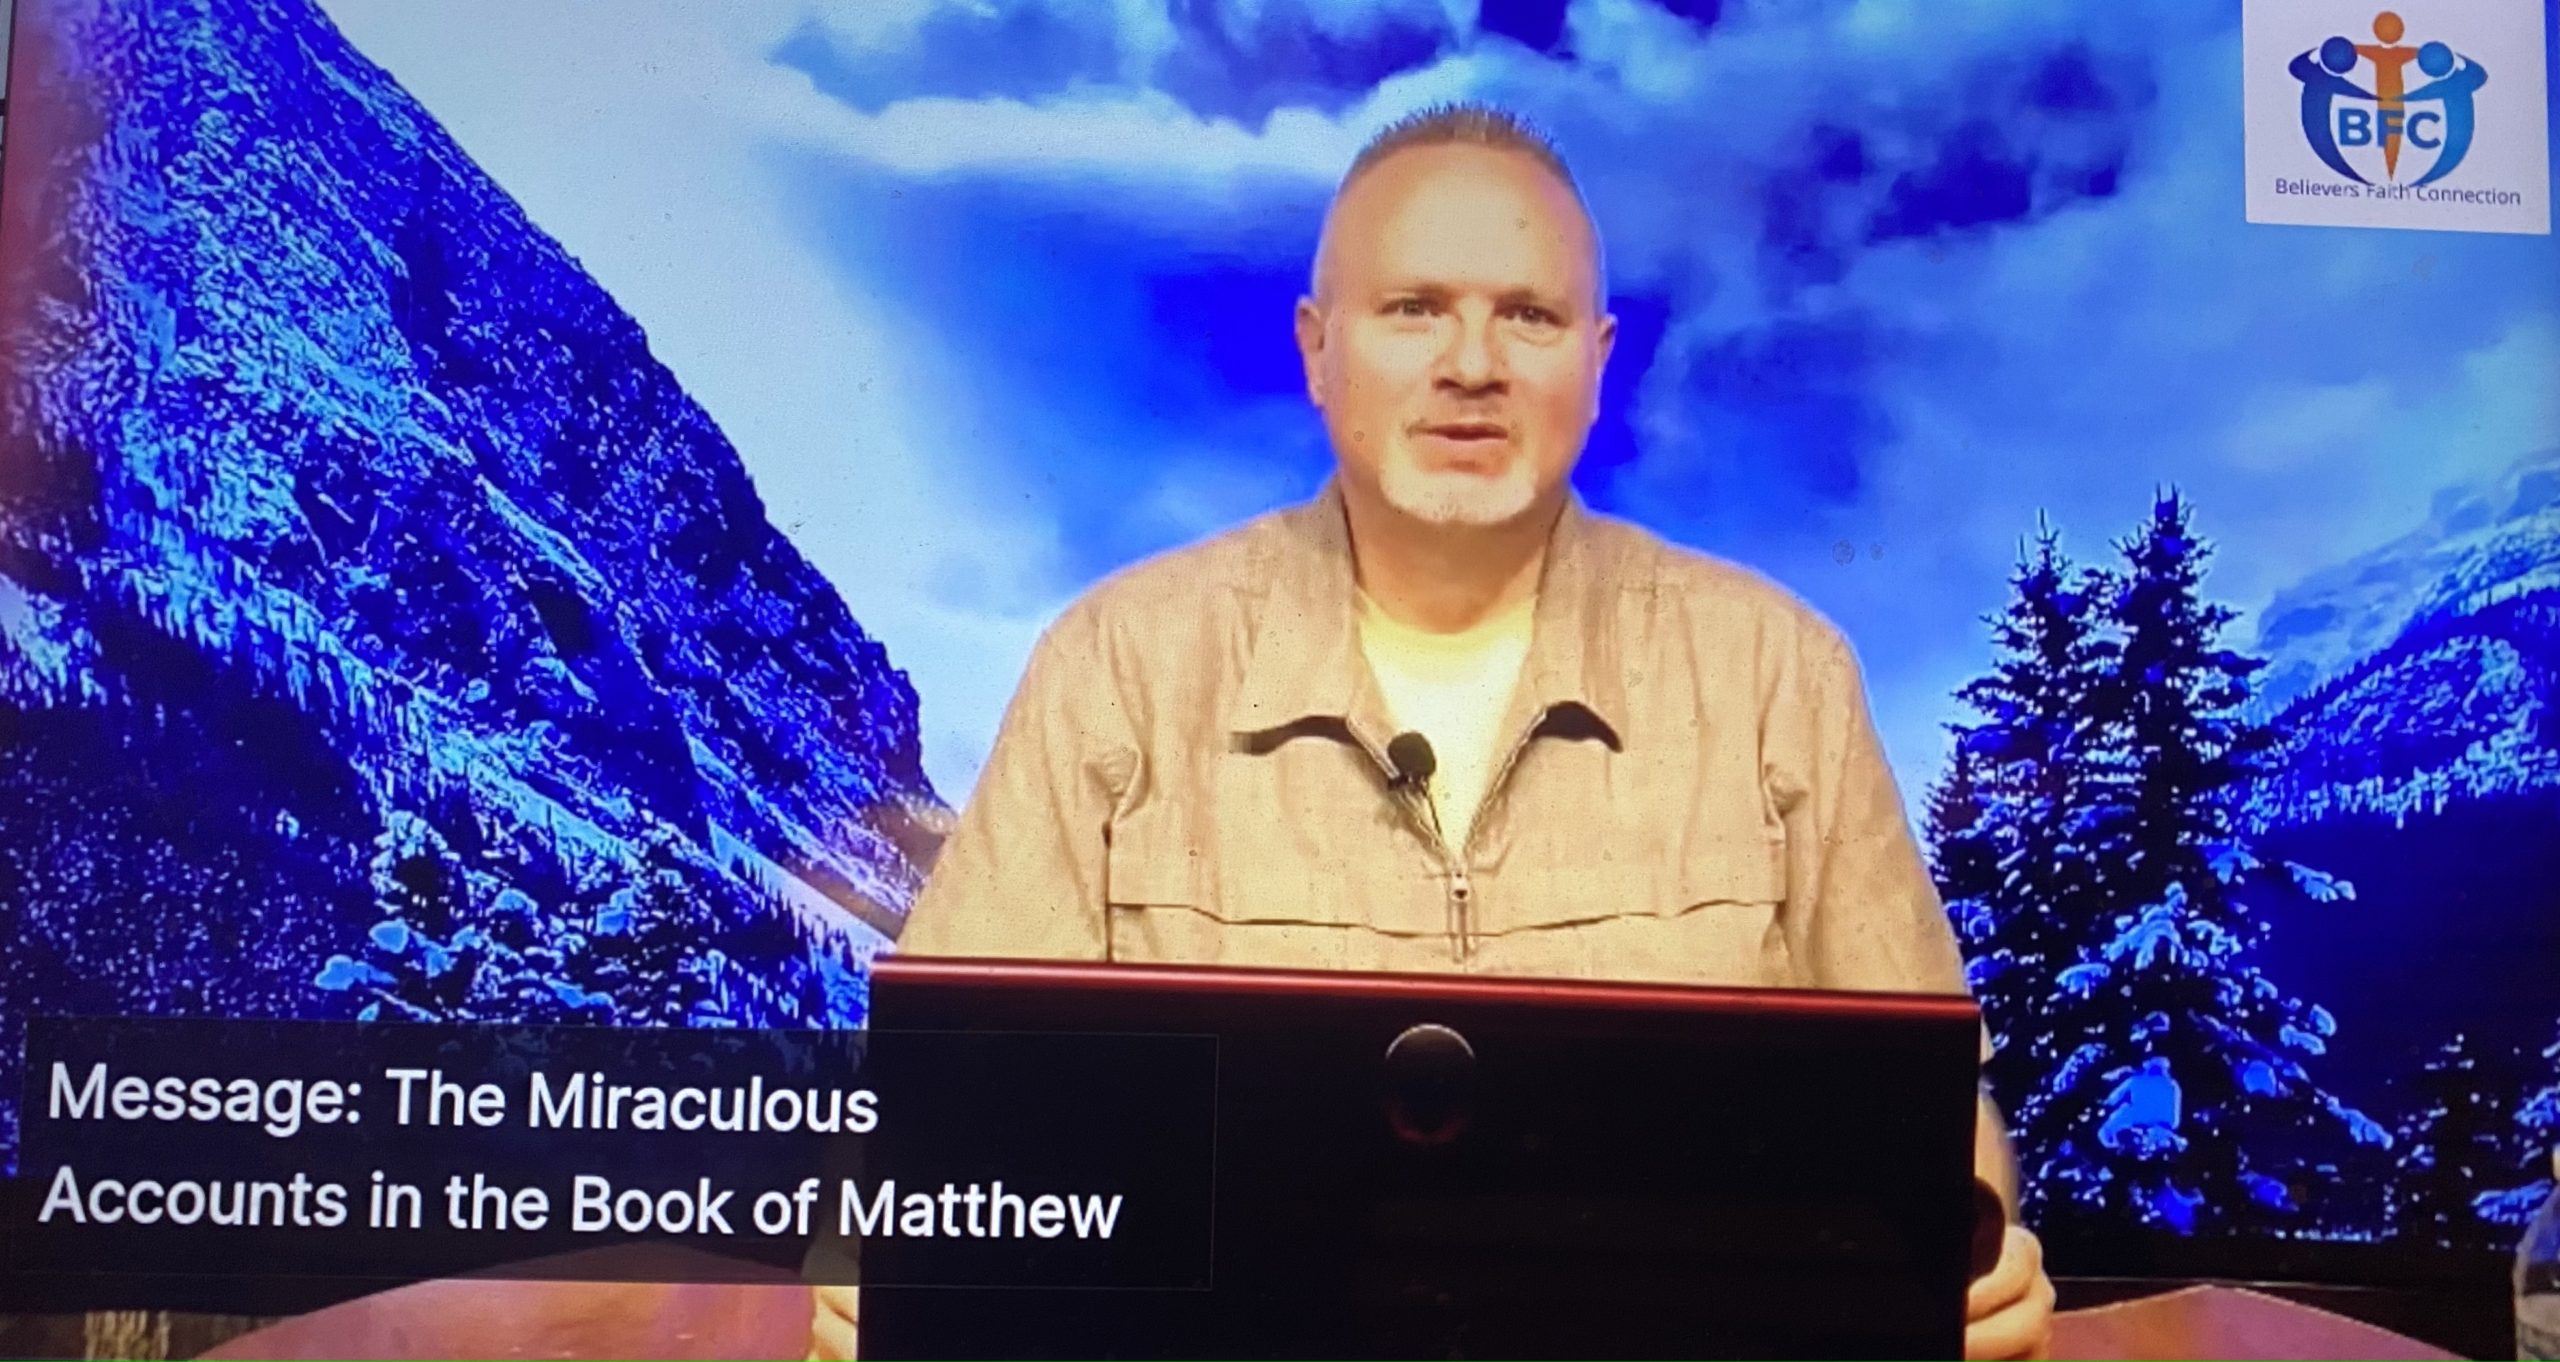 The Miraculous Accounts in the Book of Matthew